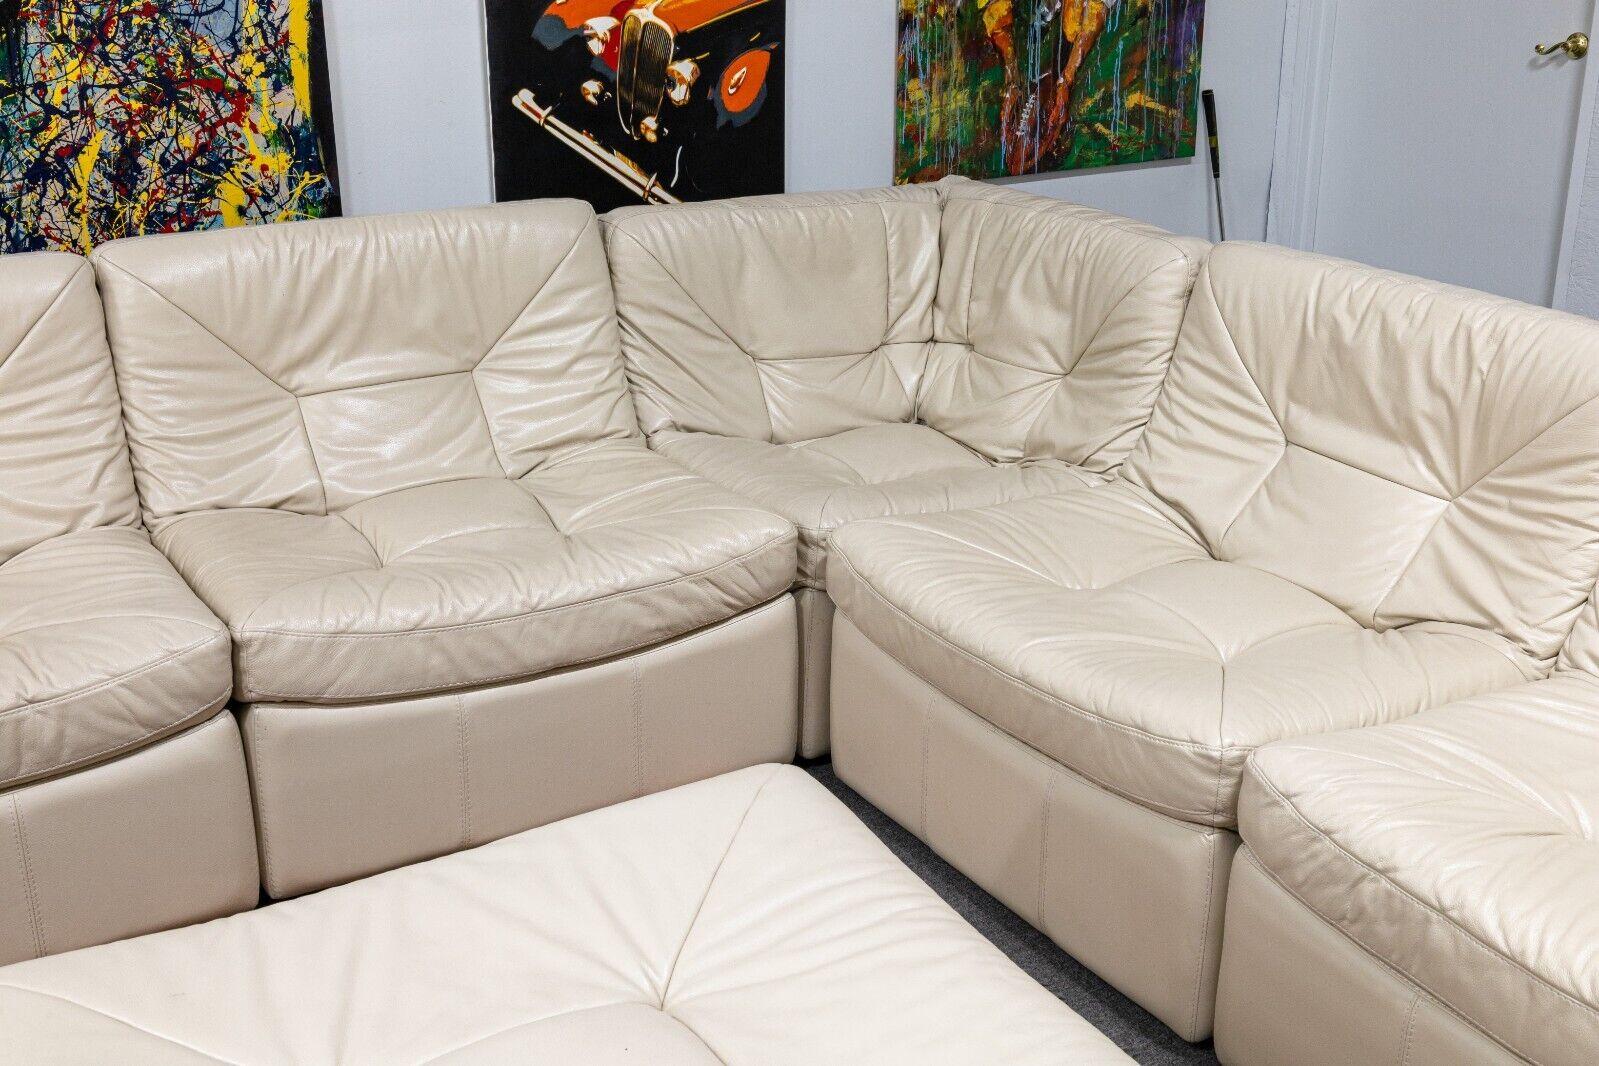 Massive Chateau d'Ax 13 Piece Contemporary Modern Cream Leather Sofa Sectional In Good Condition In Keego Harbor, MI